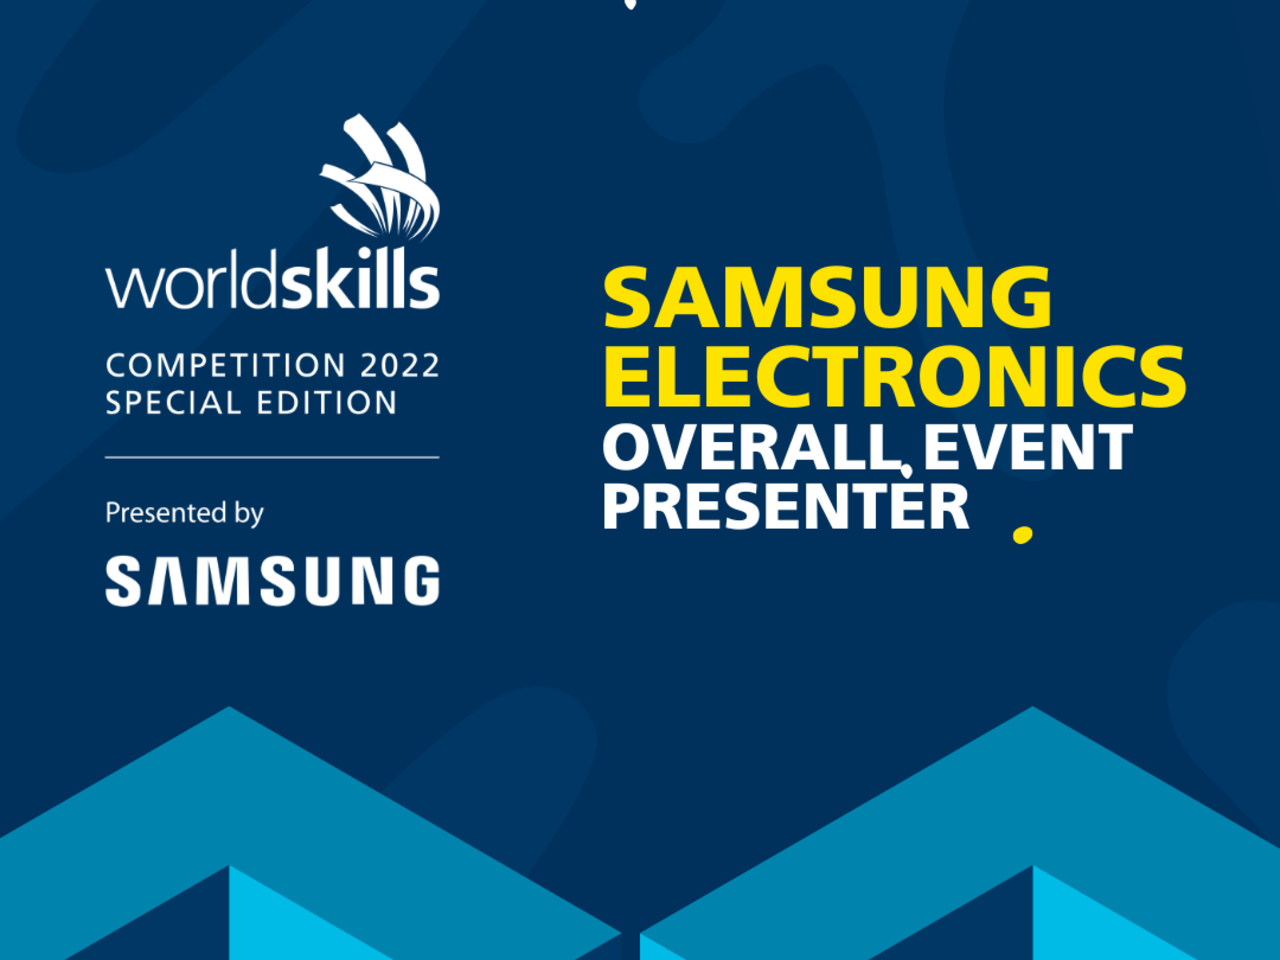 Samsung Electronics To Be Overall Event Presenter for WorldSkills Competition 2022 Special Edition